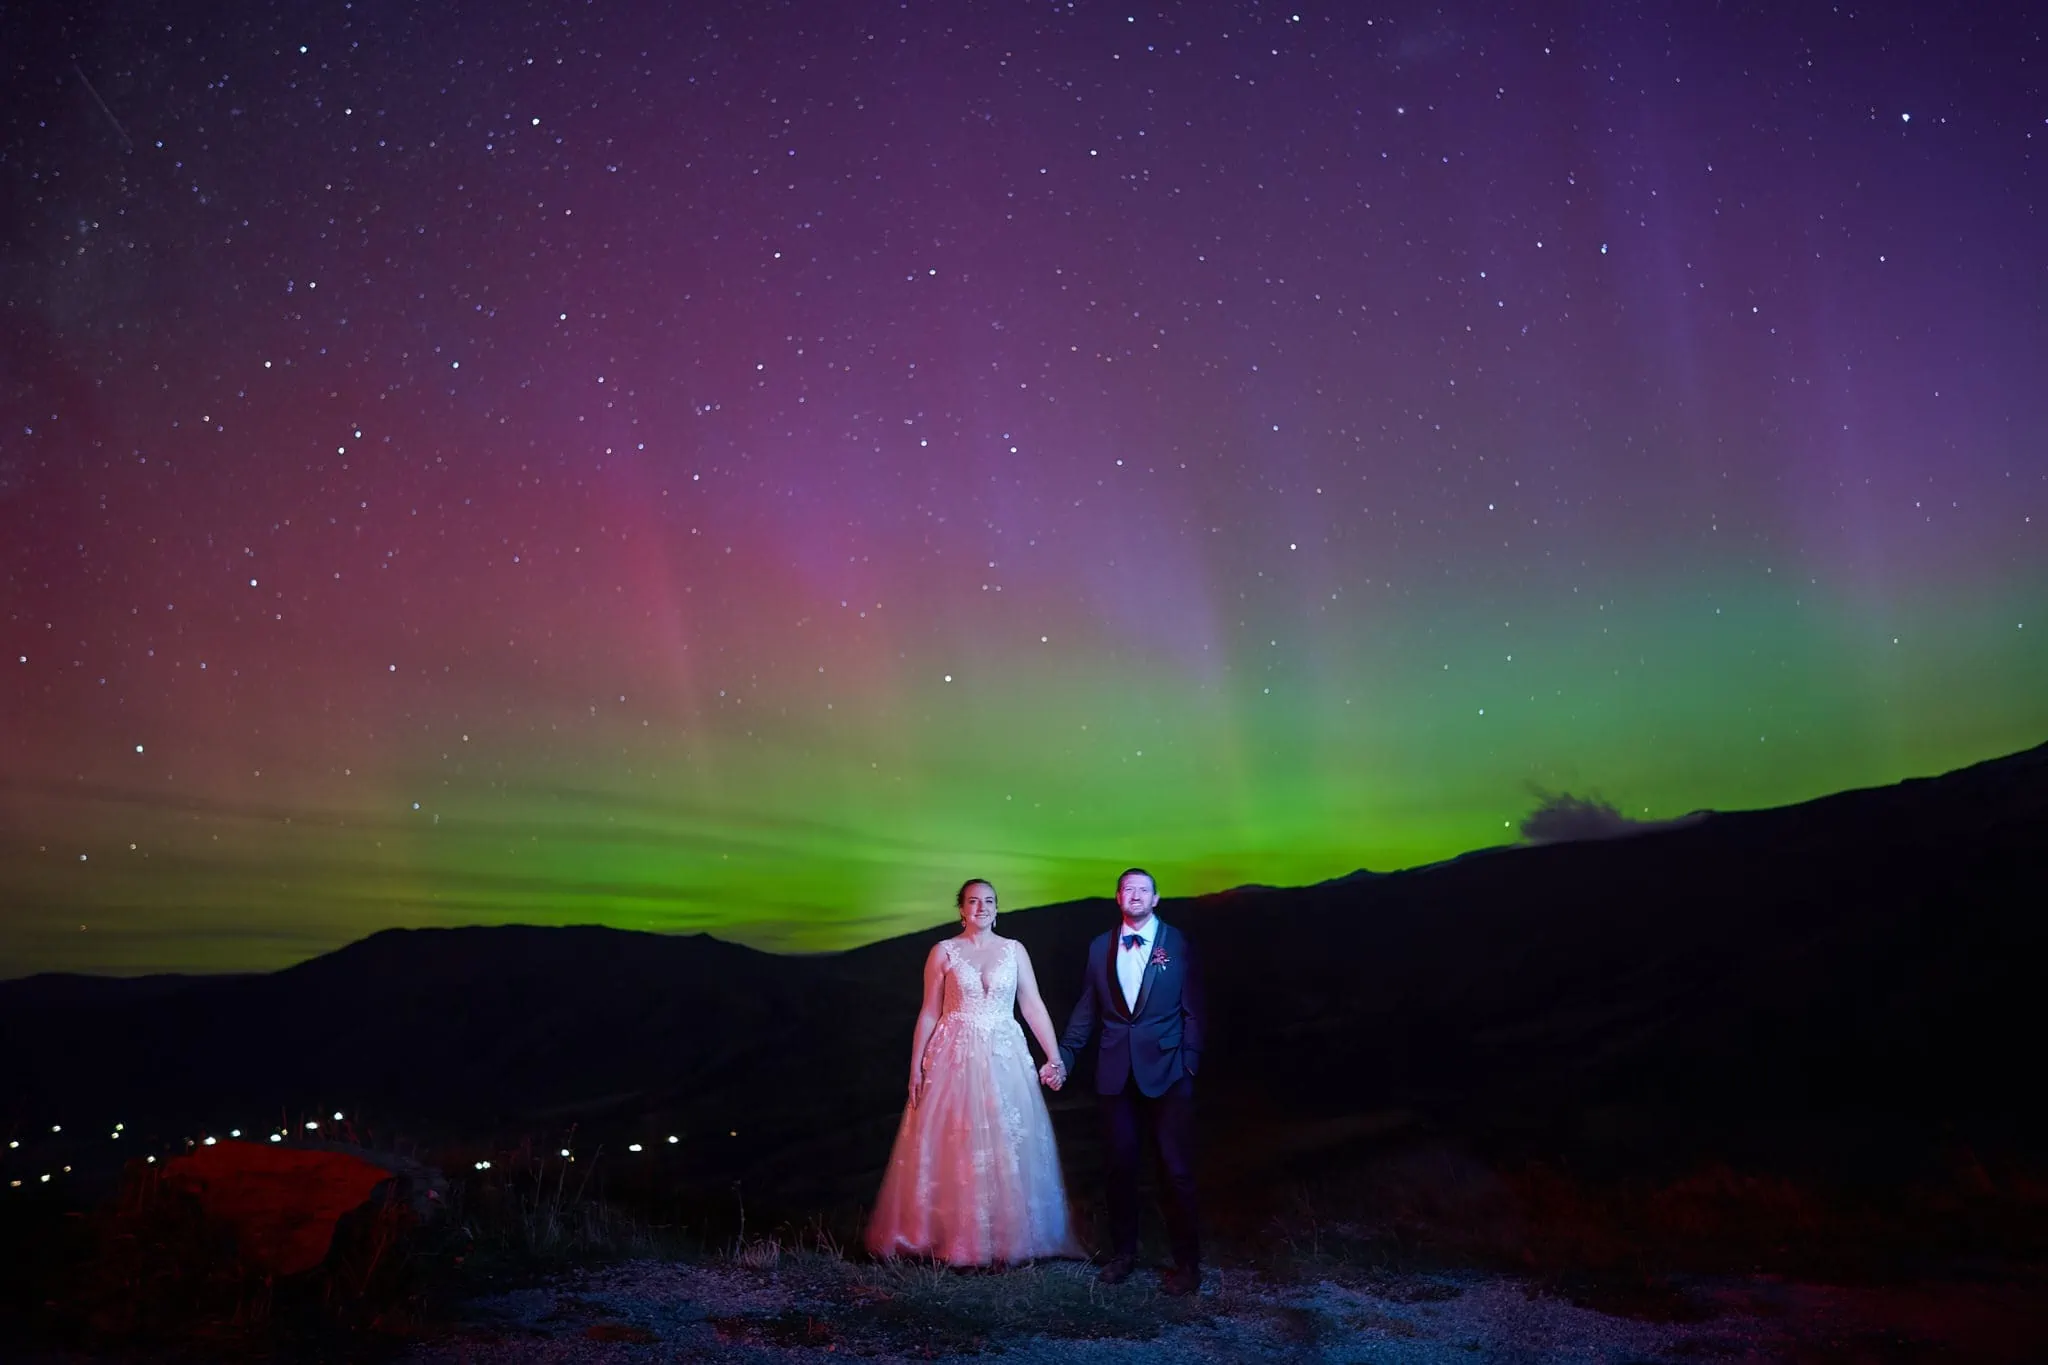 Queenstown New Zealand Elopement Wedding Photographer - A bride and groom standing under the aurora borealis during a Starry Night Shoot.